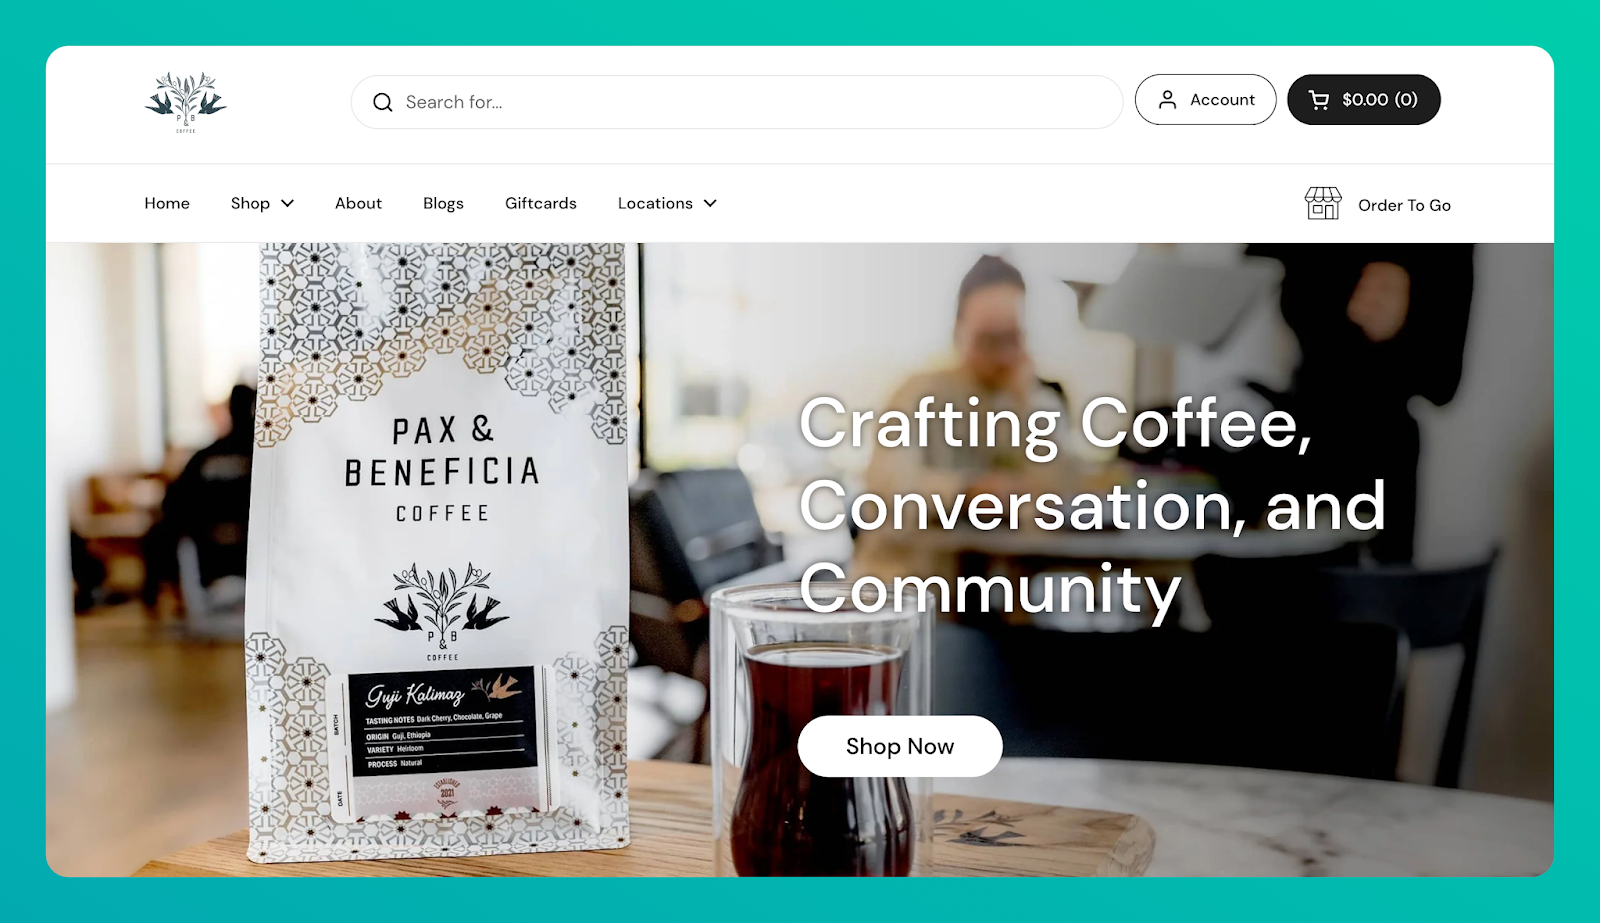 Pax & Beneficia is more than just a coffee shop. It was developed by a community brought together by their love of coffee and meaningful connections.